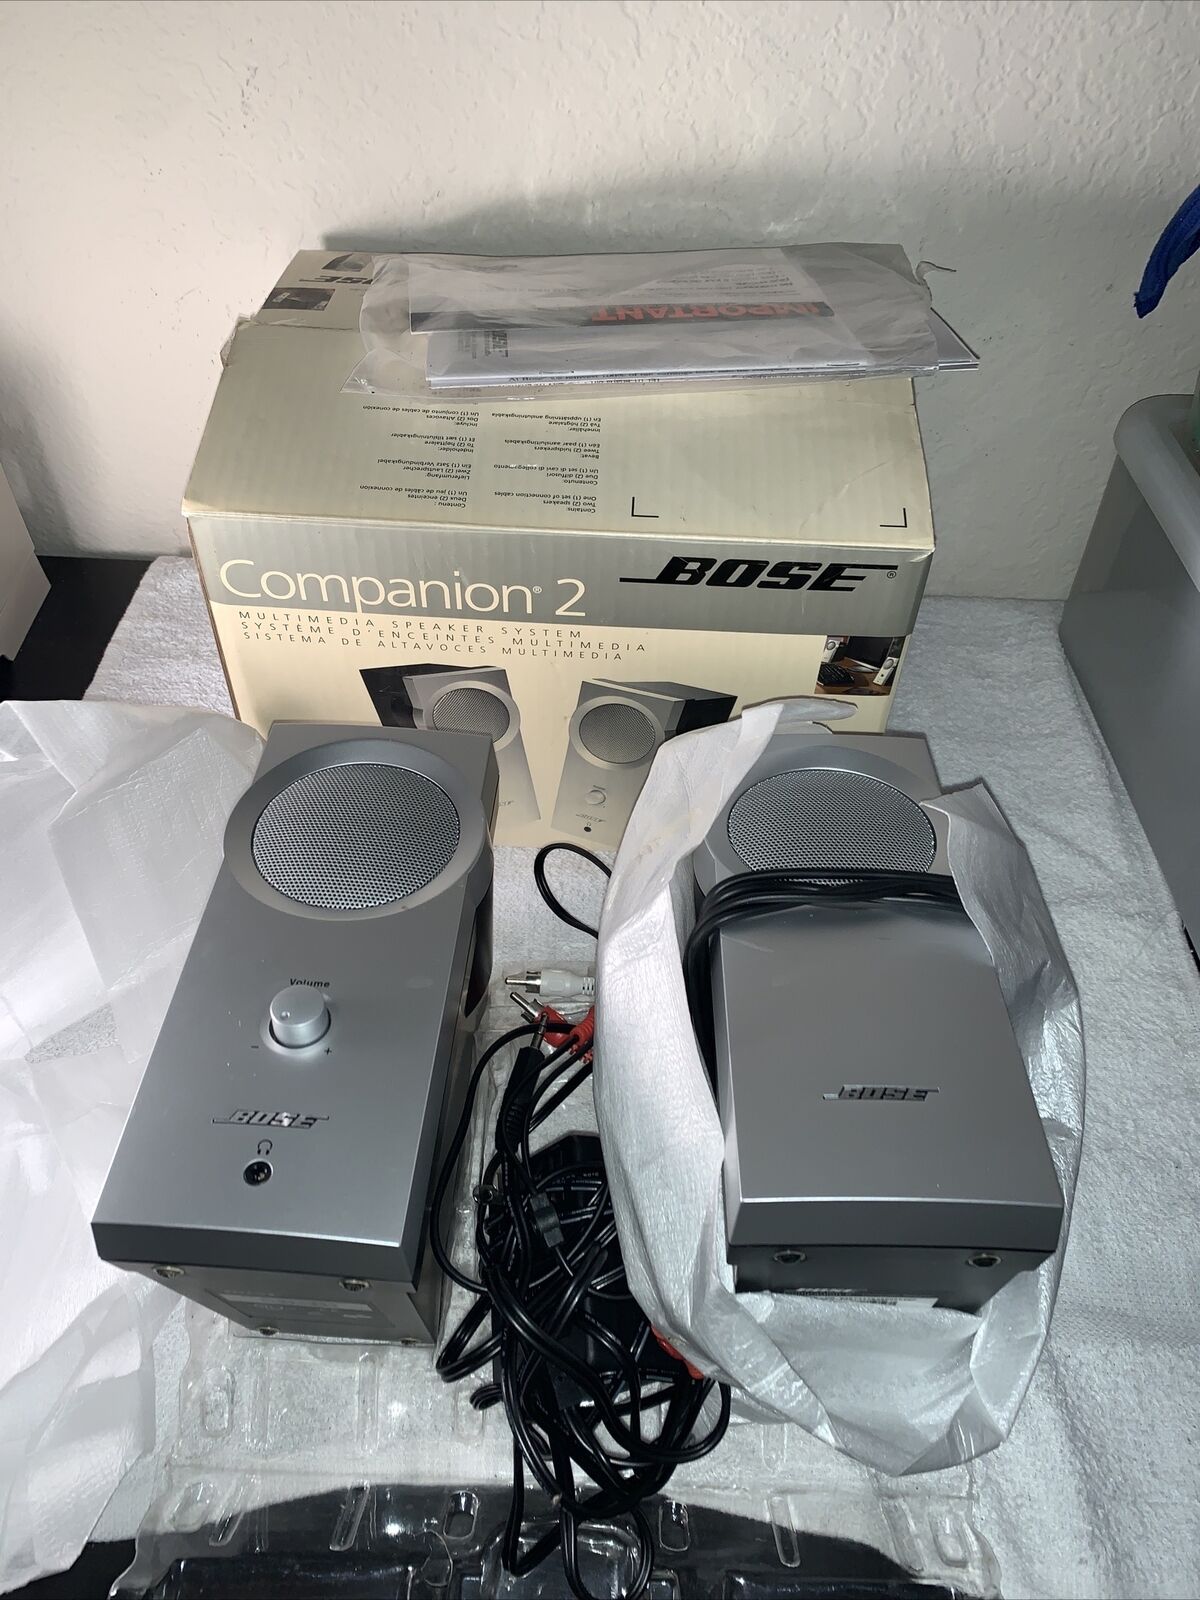 BOSE COMPANION 2 MULTIMEDIA SPEAKERS IN BOX Tested Works Amazing Sound Mint